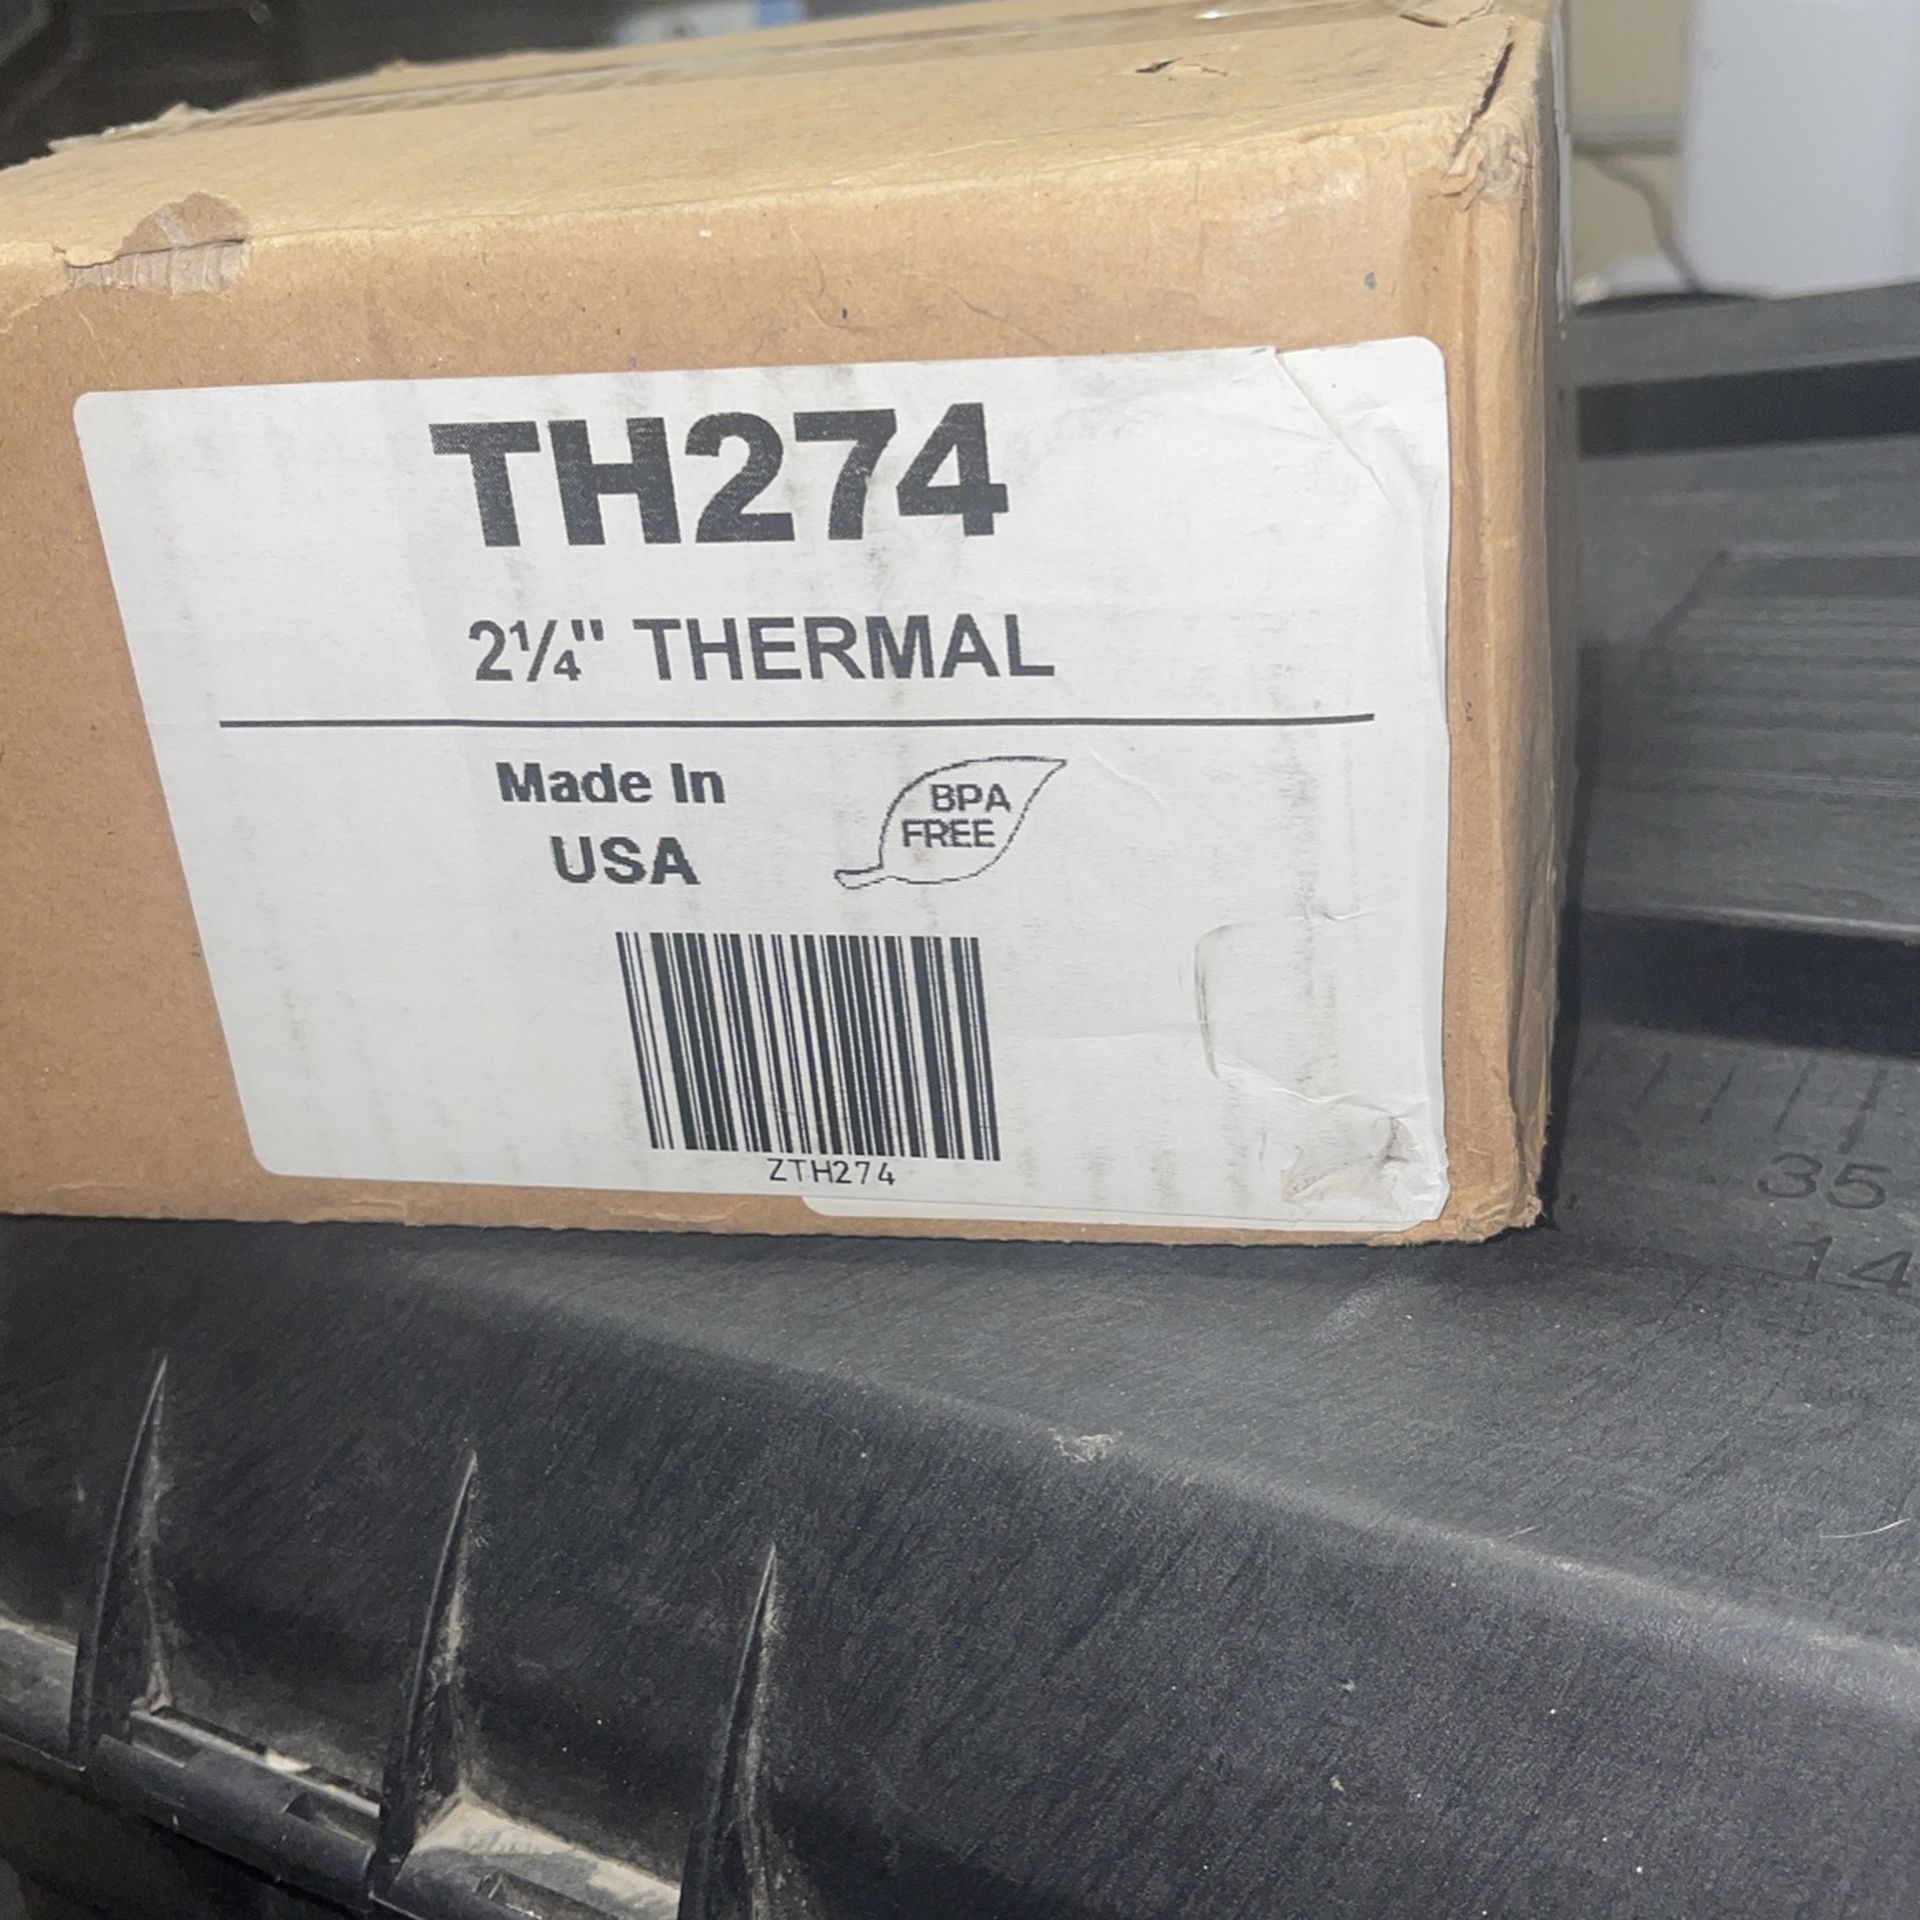 THERMAL PAPER ROLL - 2 1/4" X 70' Case Of 50